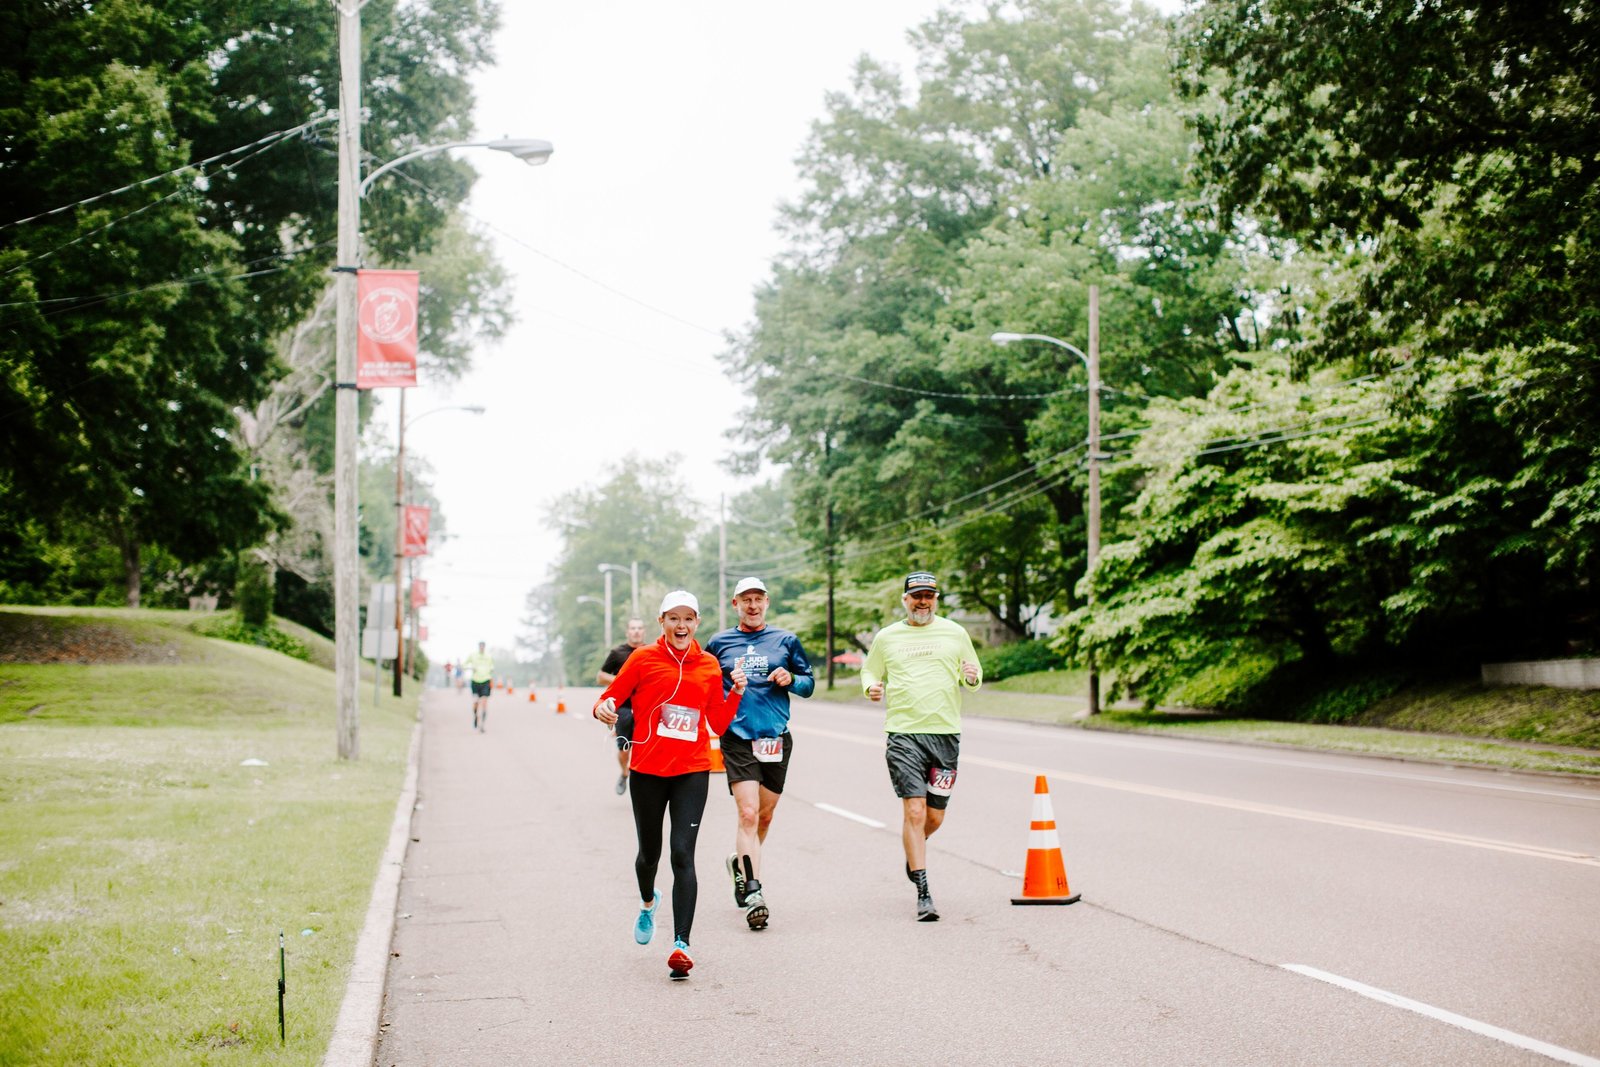 2019 West Tennessee Strawberry Festival - 5k Race - 20